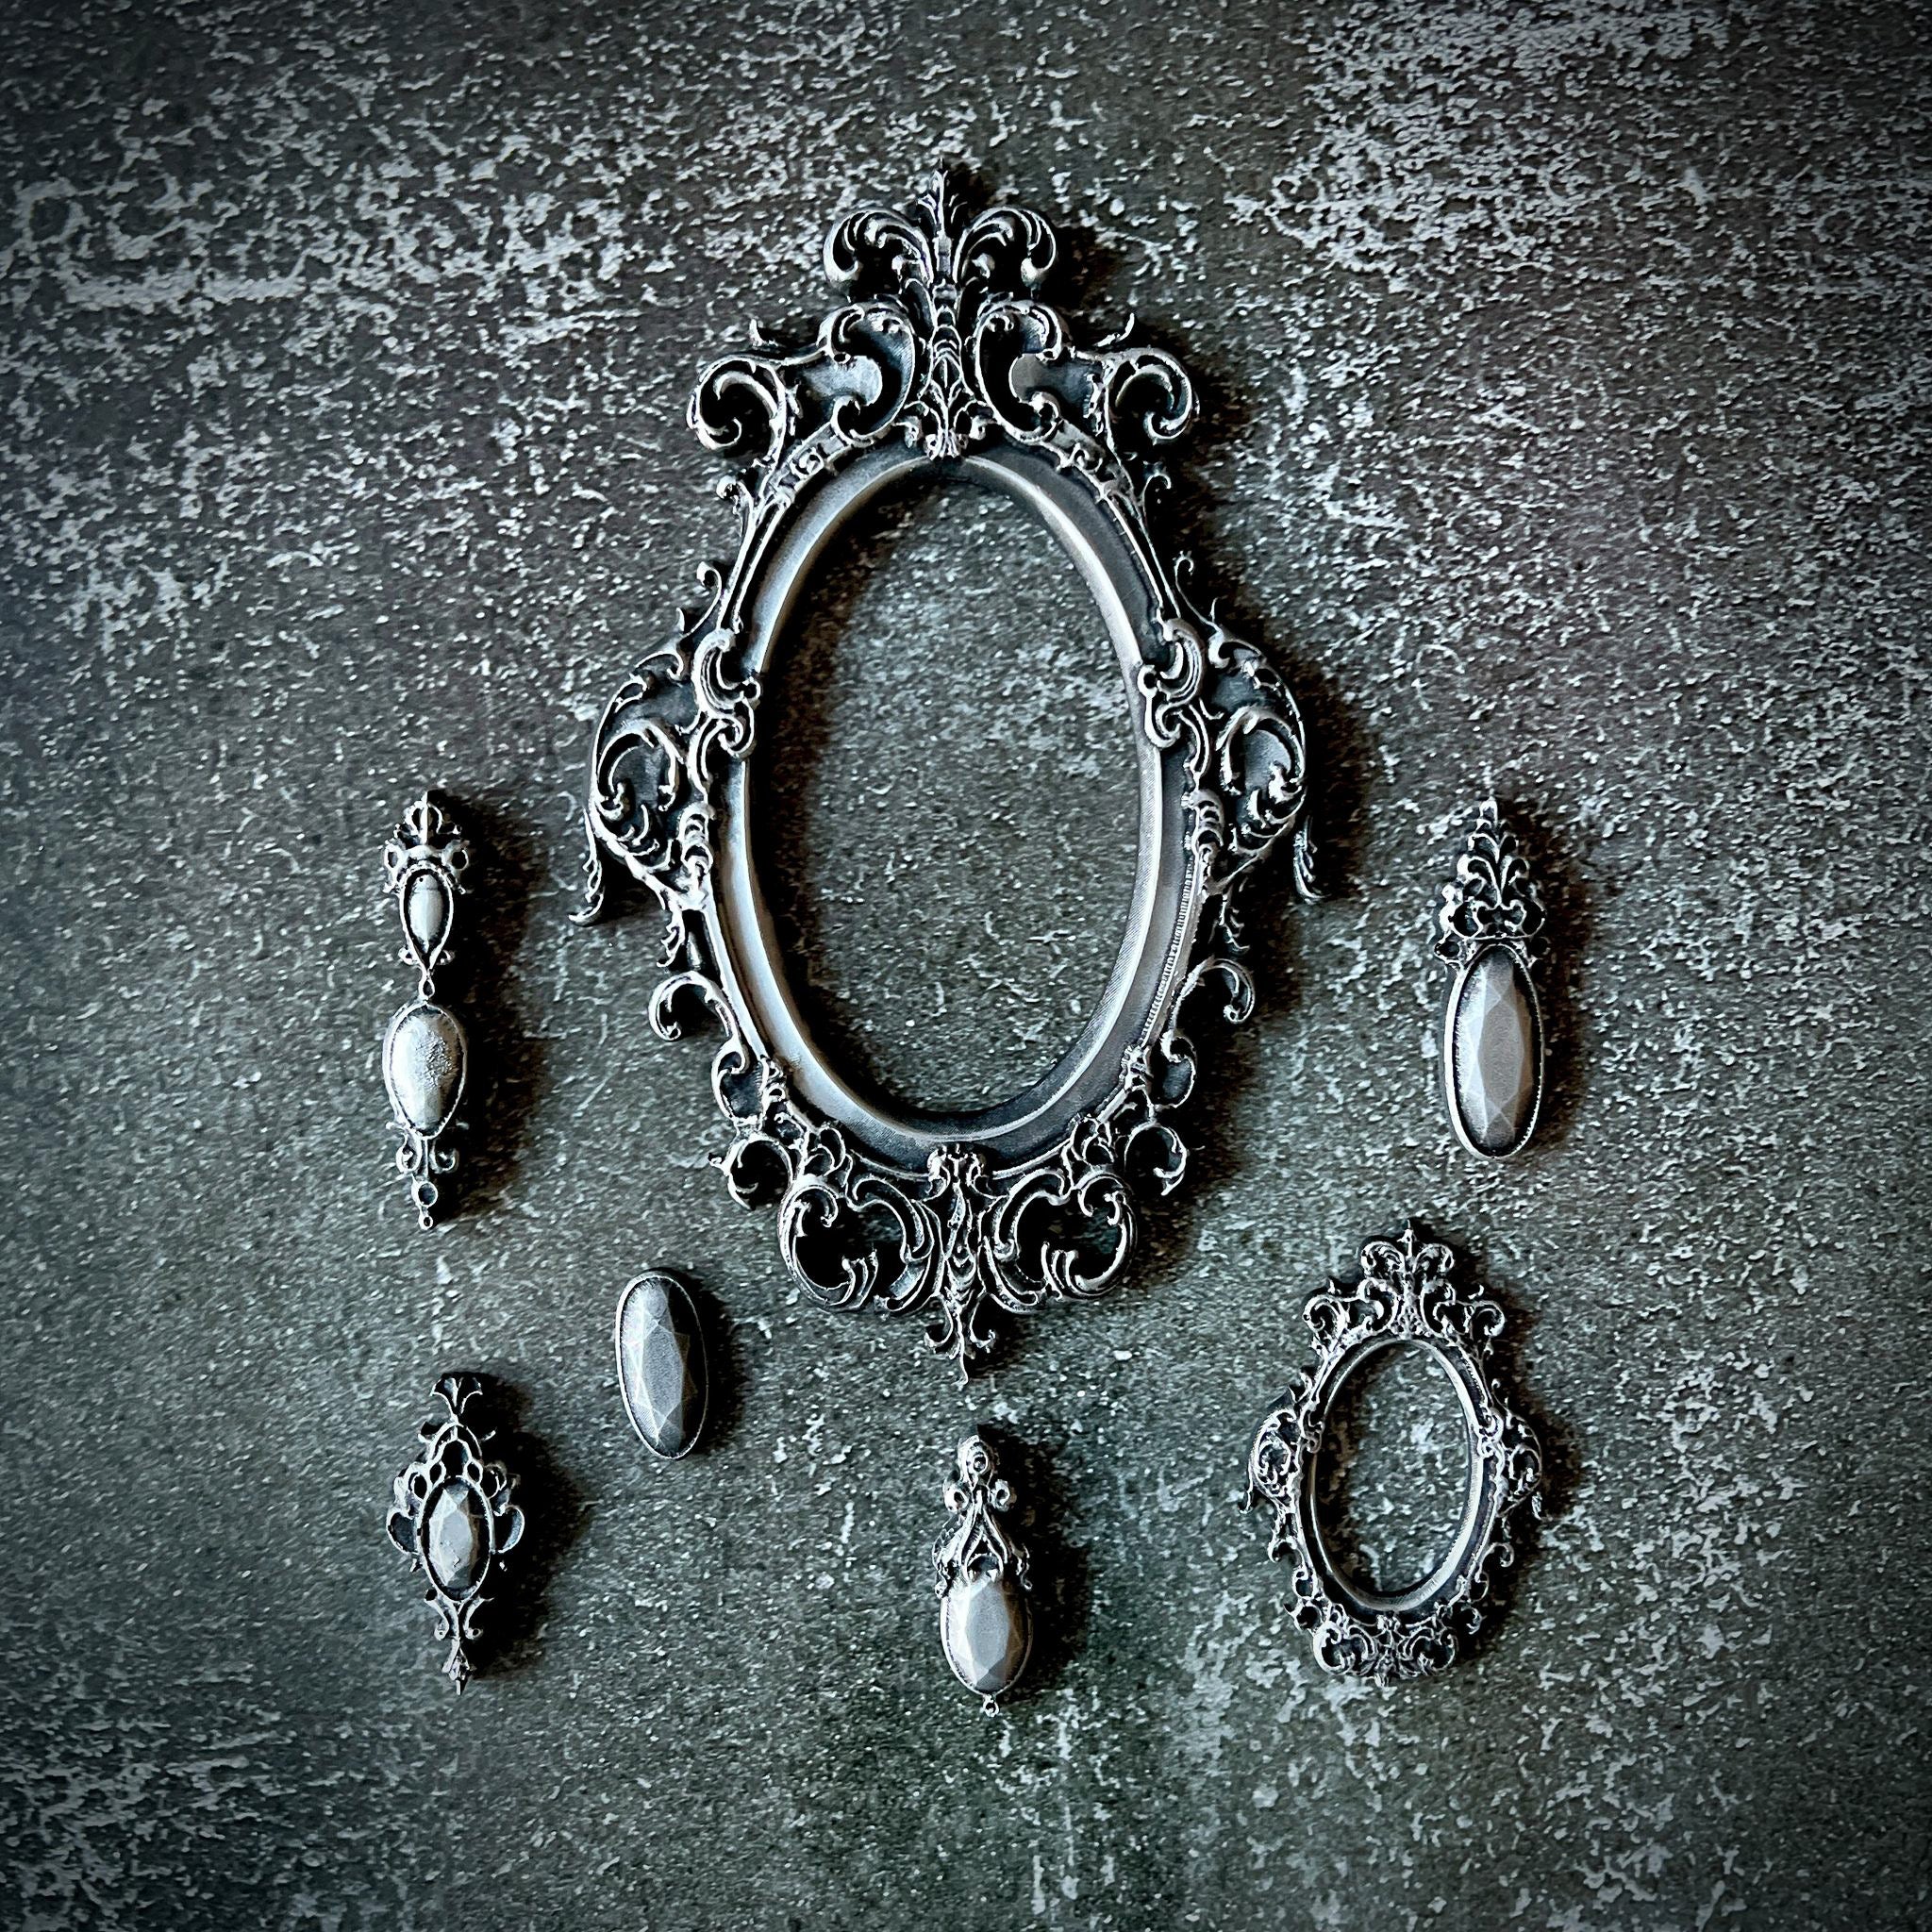 Silver silicone mould castings of 2 ornate oval frames and 5 ornate pendants are against a grey textured background.